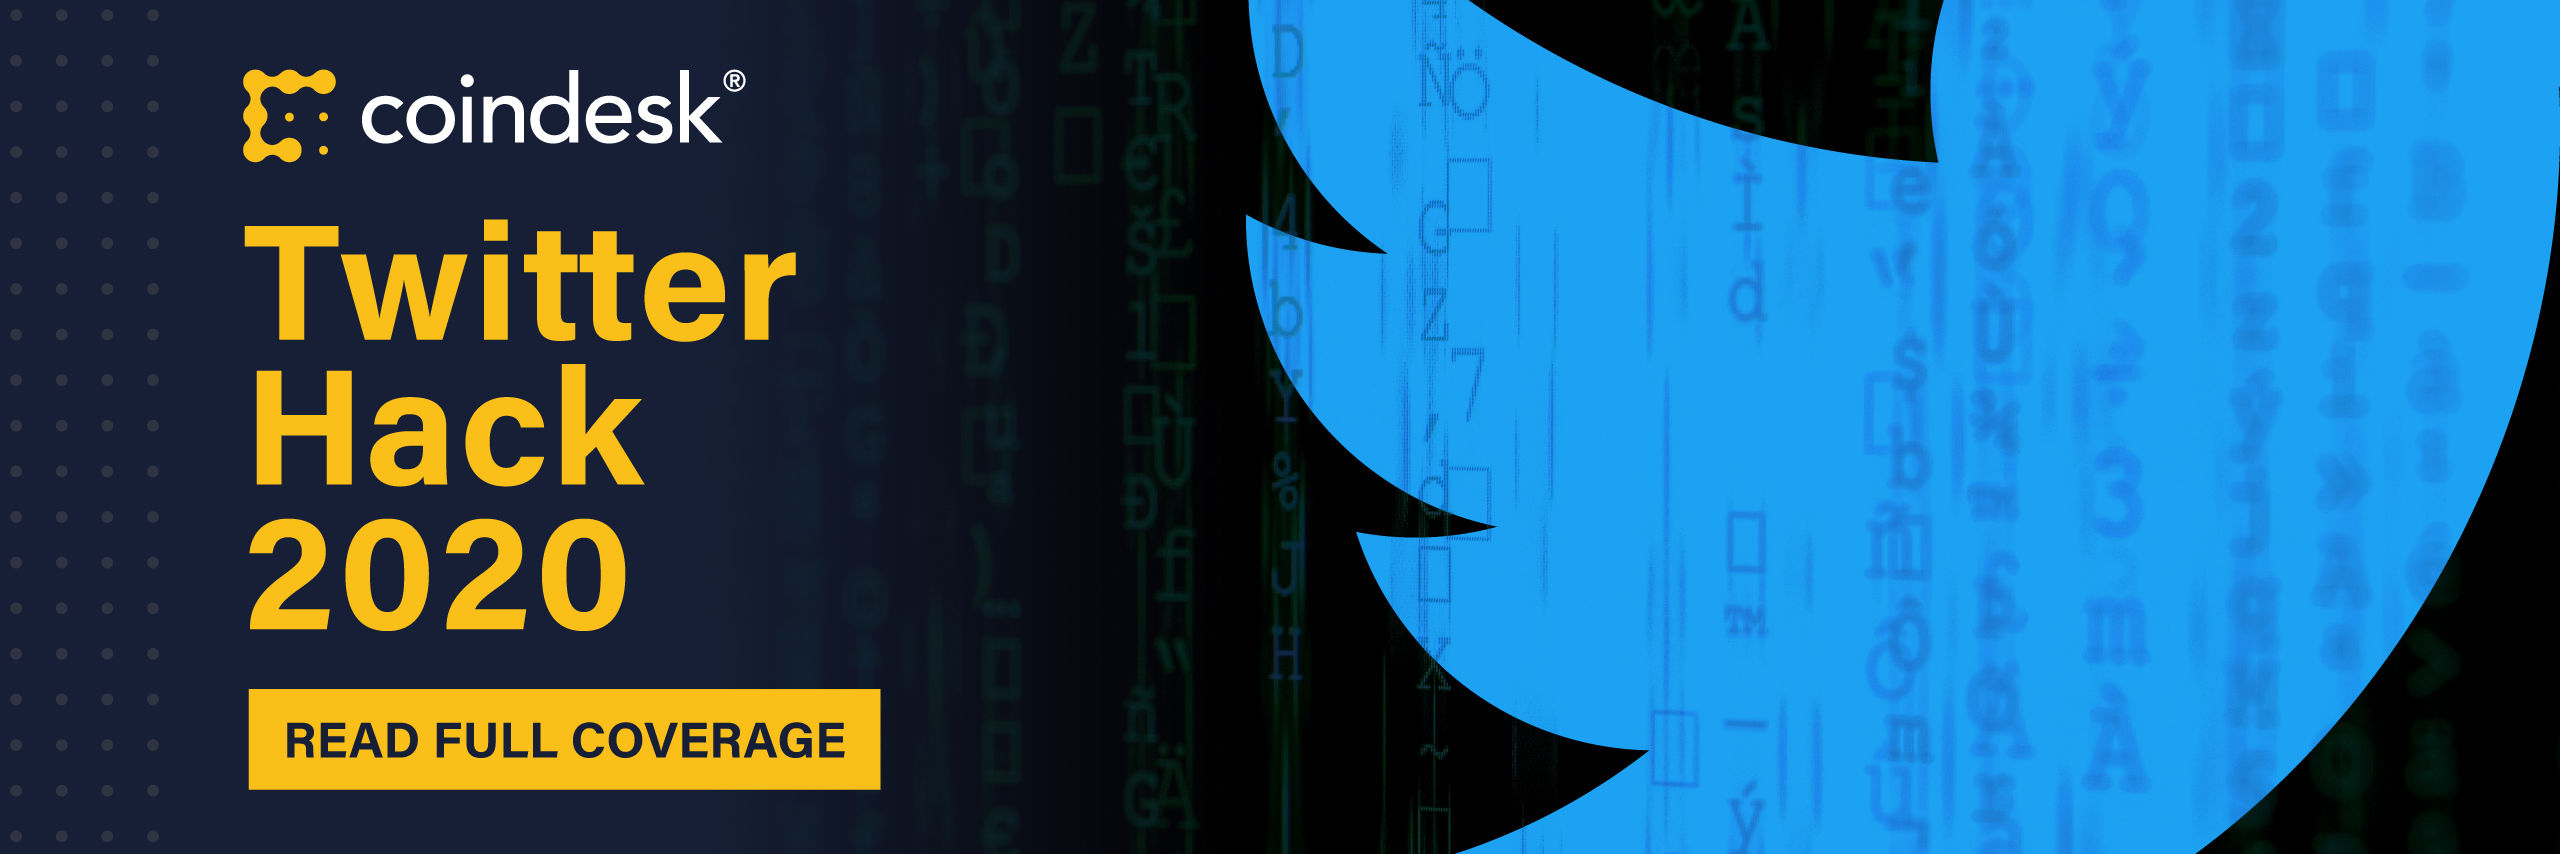 Twitter Hack: Chainalysis and CipherTrace Confirm FBI Investigation